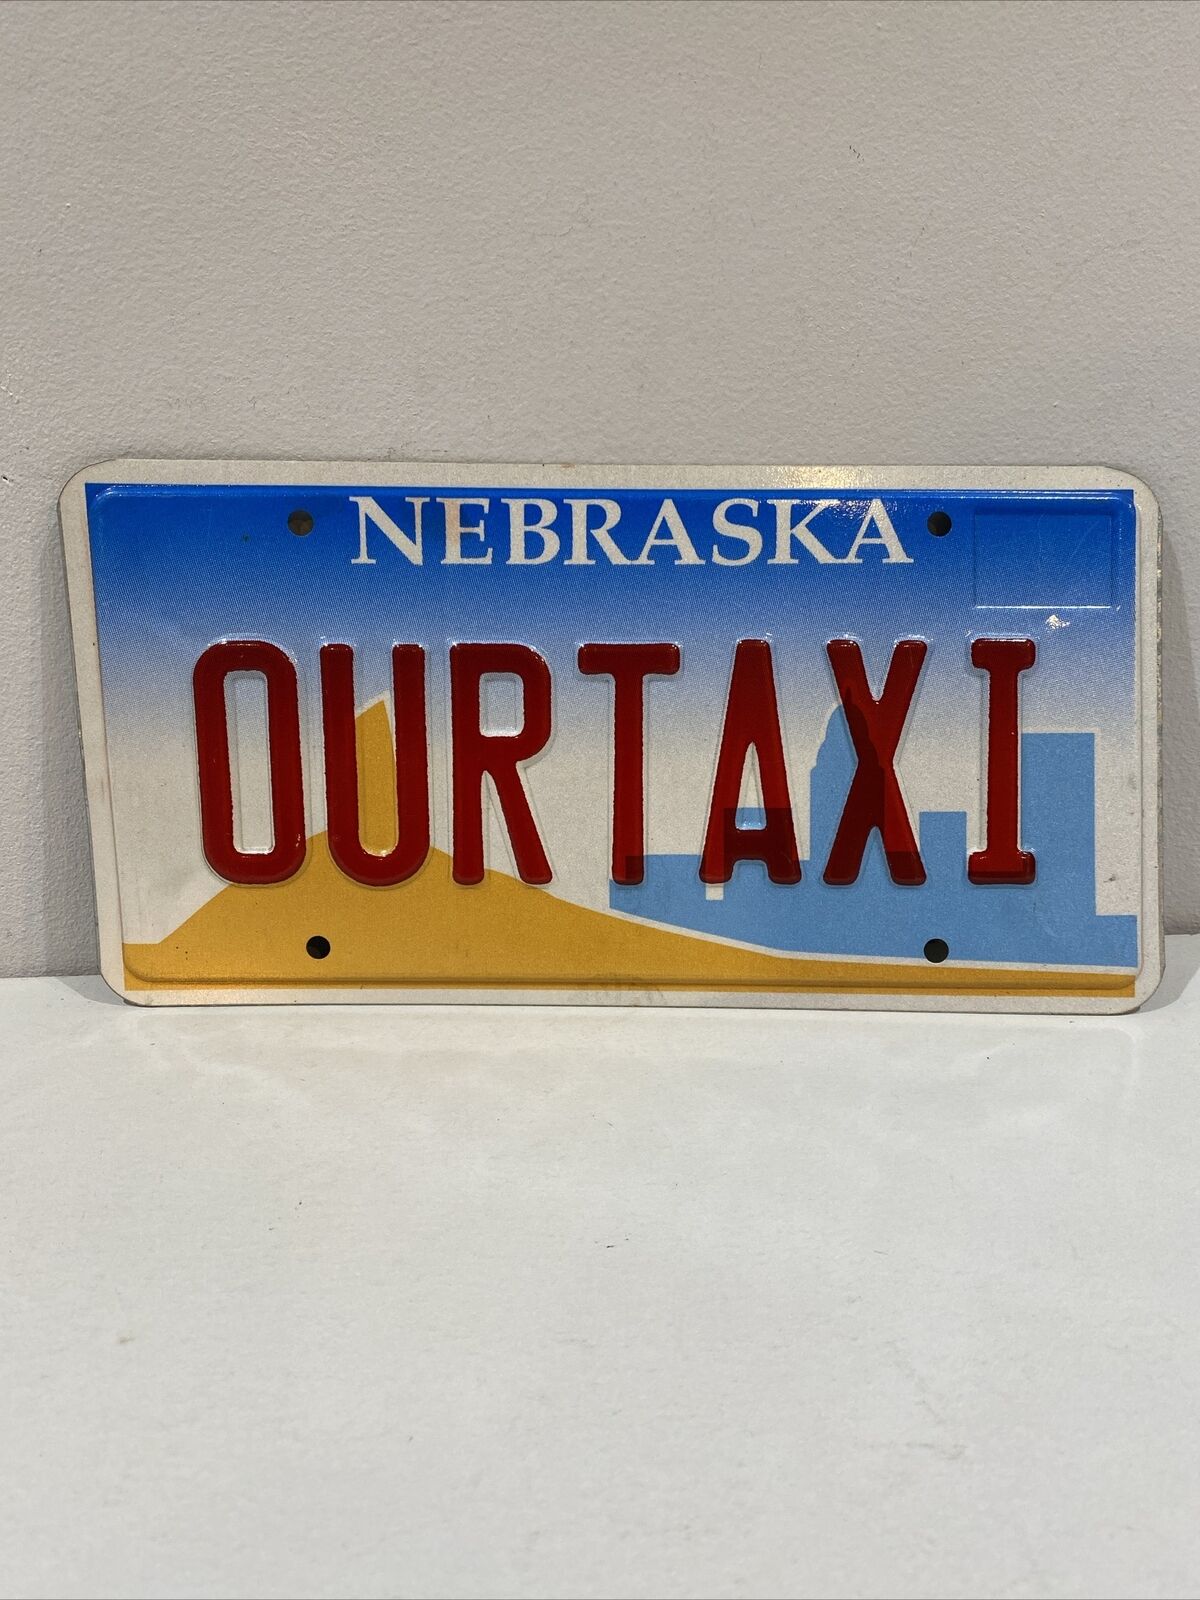 Vintage 2000 Nebraska Vanity License Plate Tag Retired Authentic Metal OUR TAXI